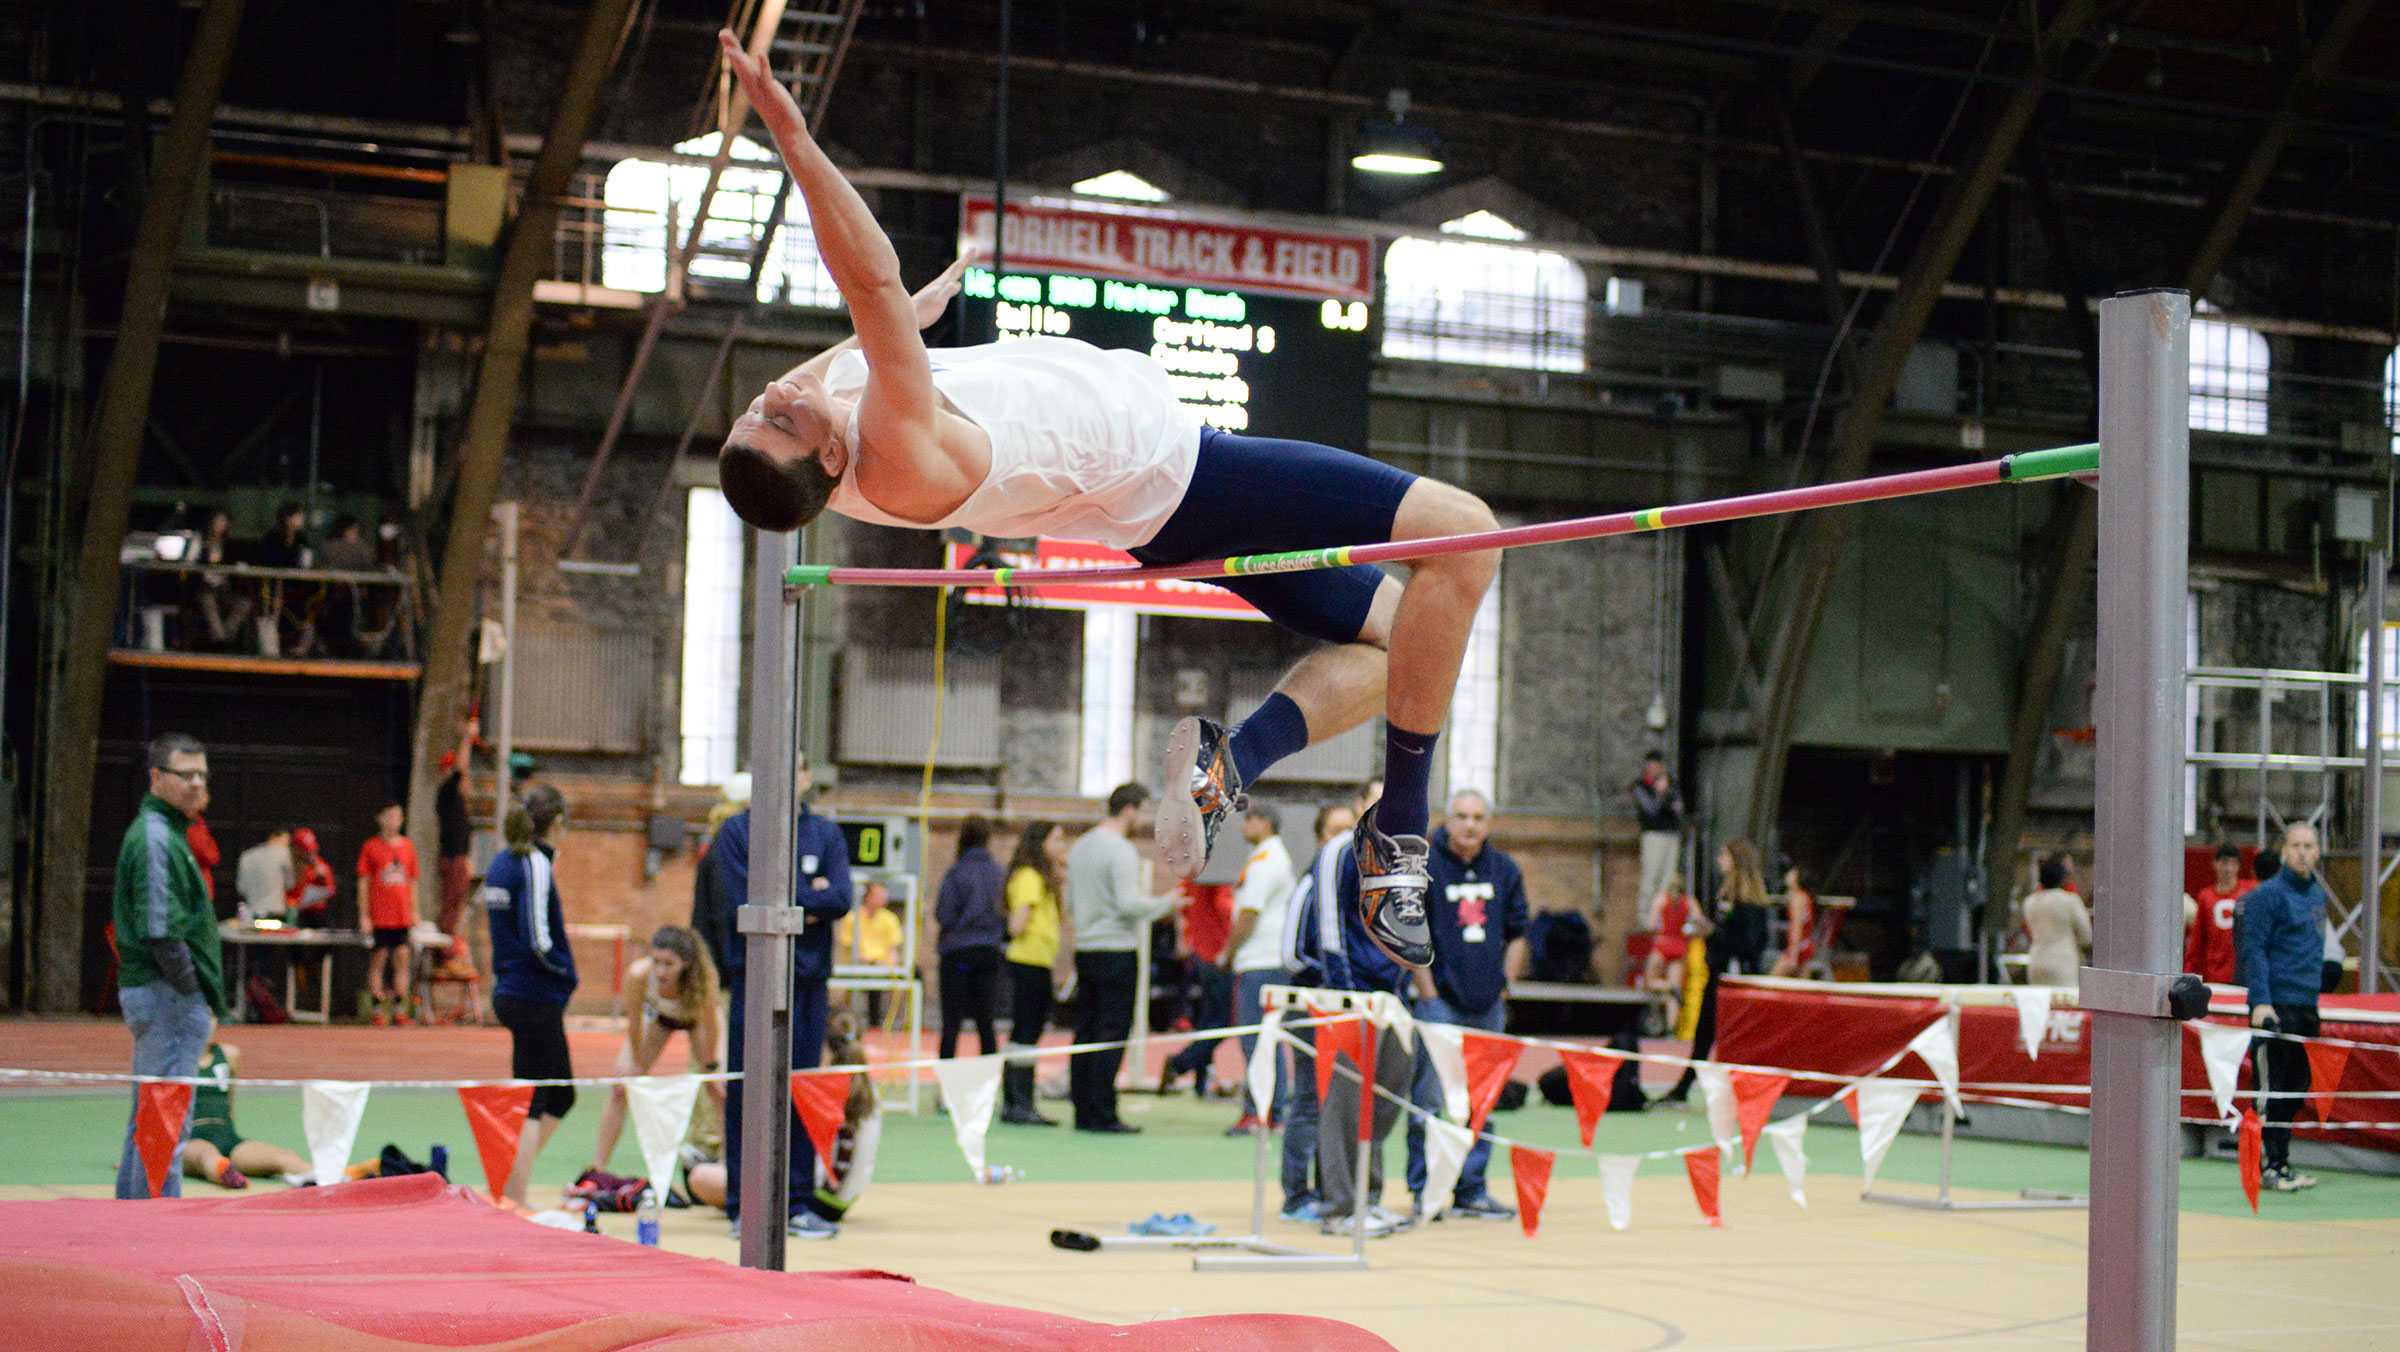 Track and field athlete transitions from dunking to jumping